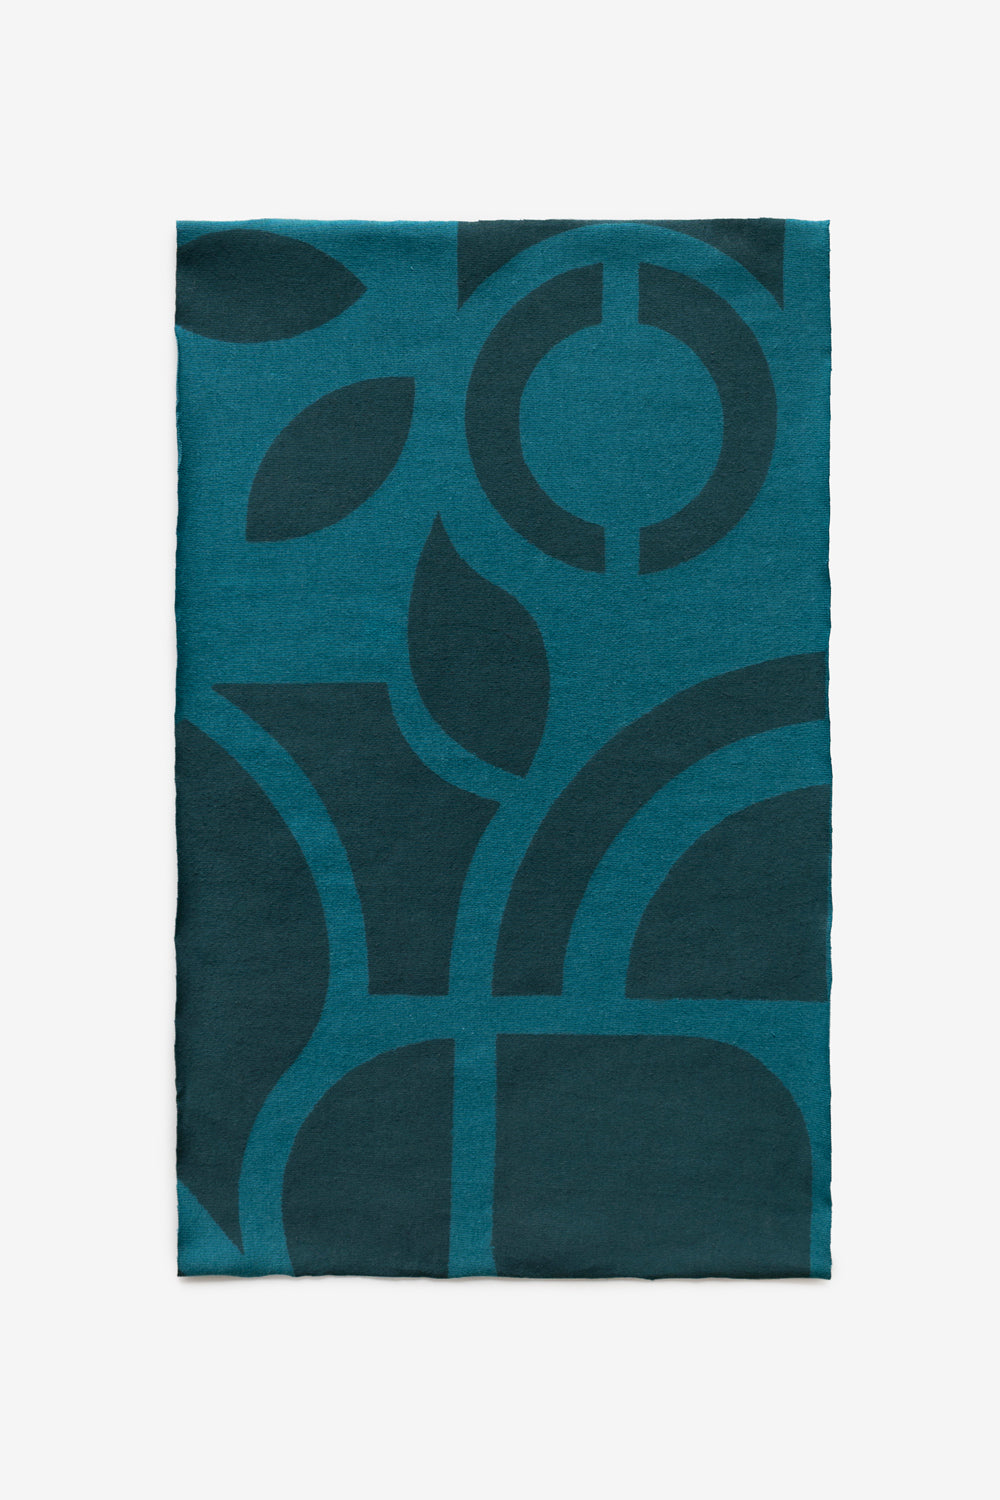 Teal fabric stenciled with the Abstract design in tonal paint.